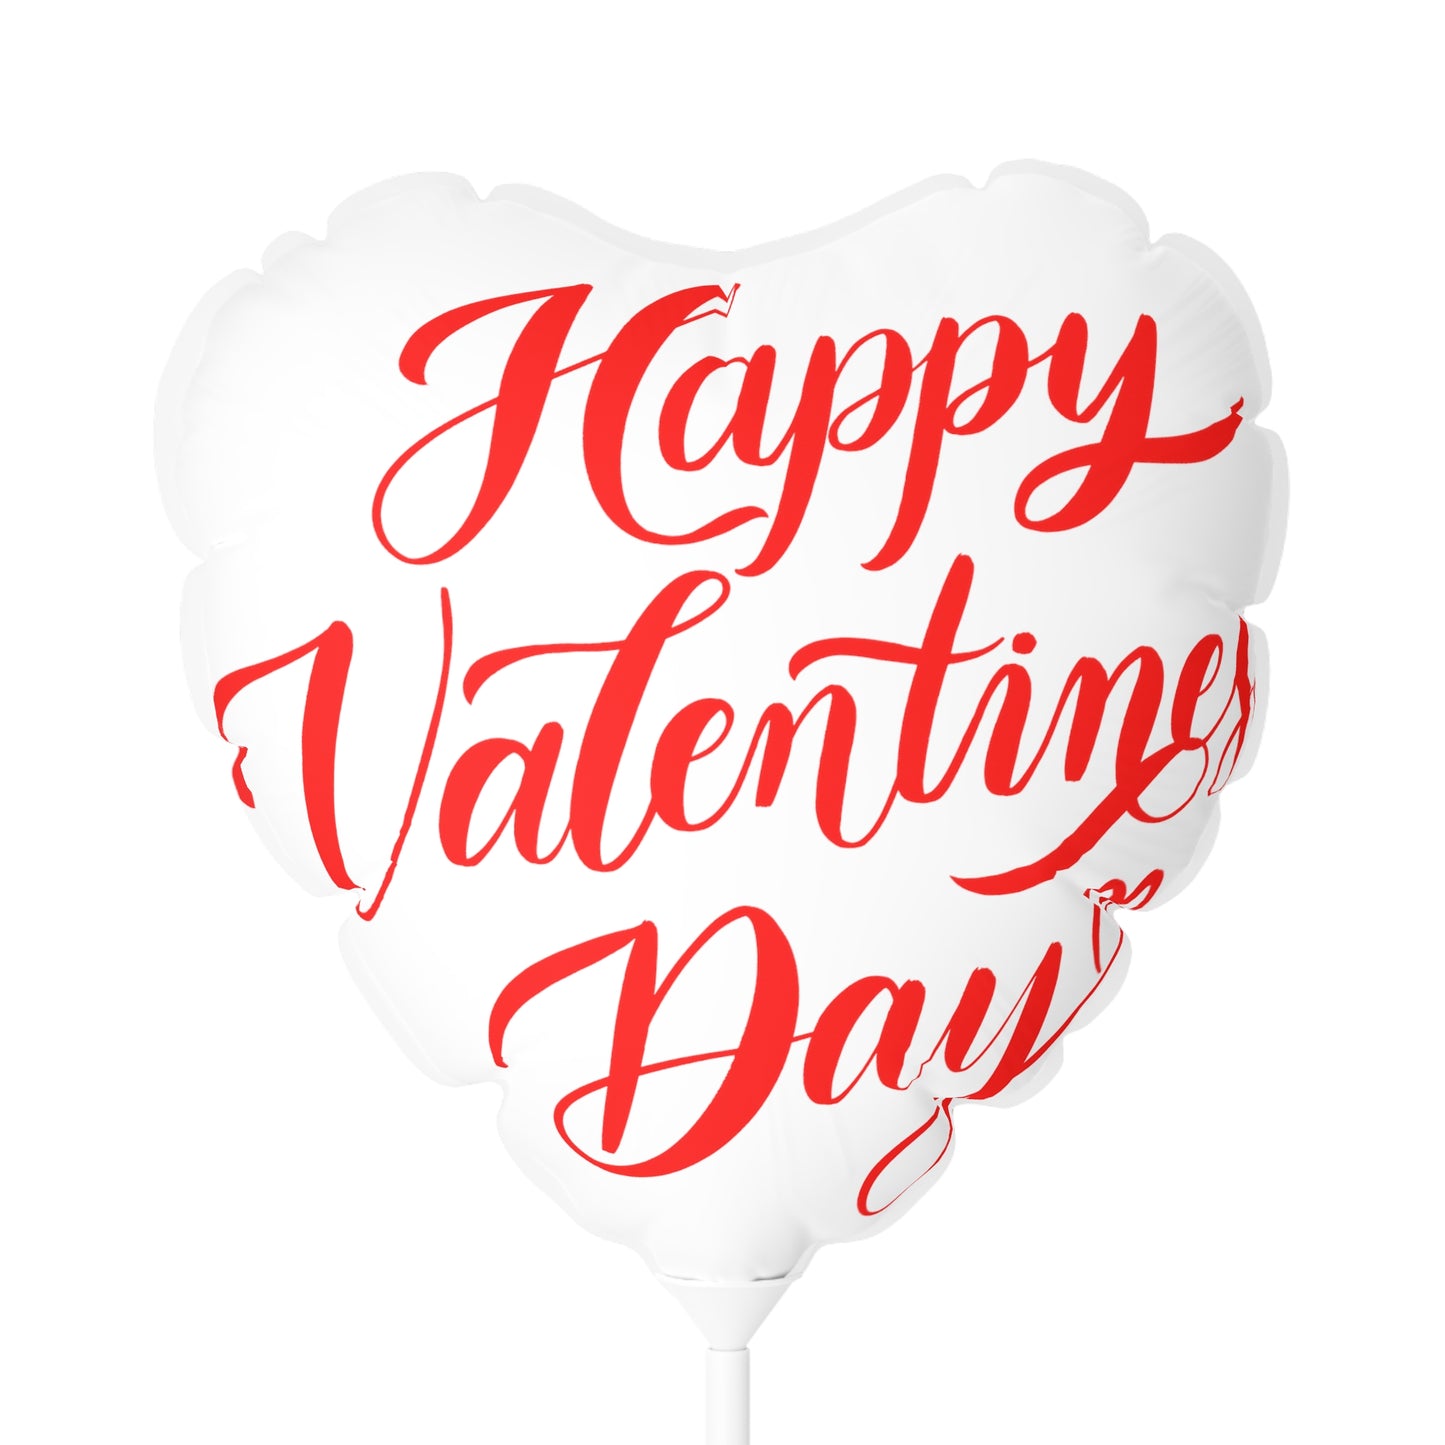 "Happy Valentine's Day" Balloon (Heart-shaped), 11" Heart Shaped Balloon, Inflate with Air Only, Indoor and Outdoor Decoration